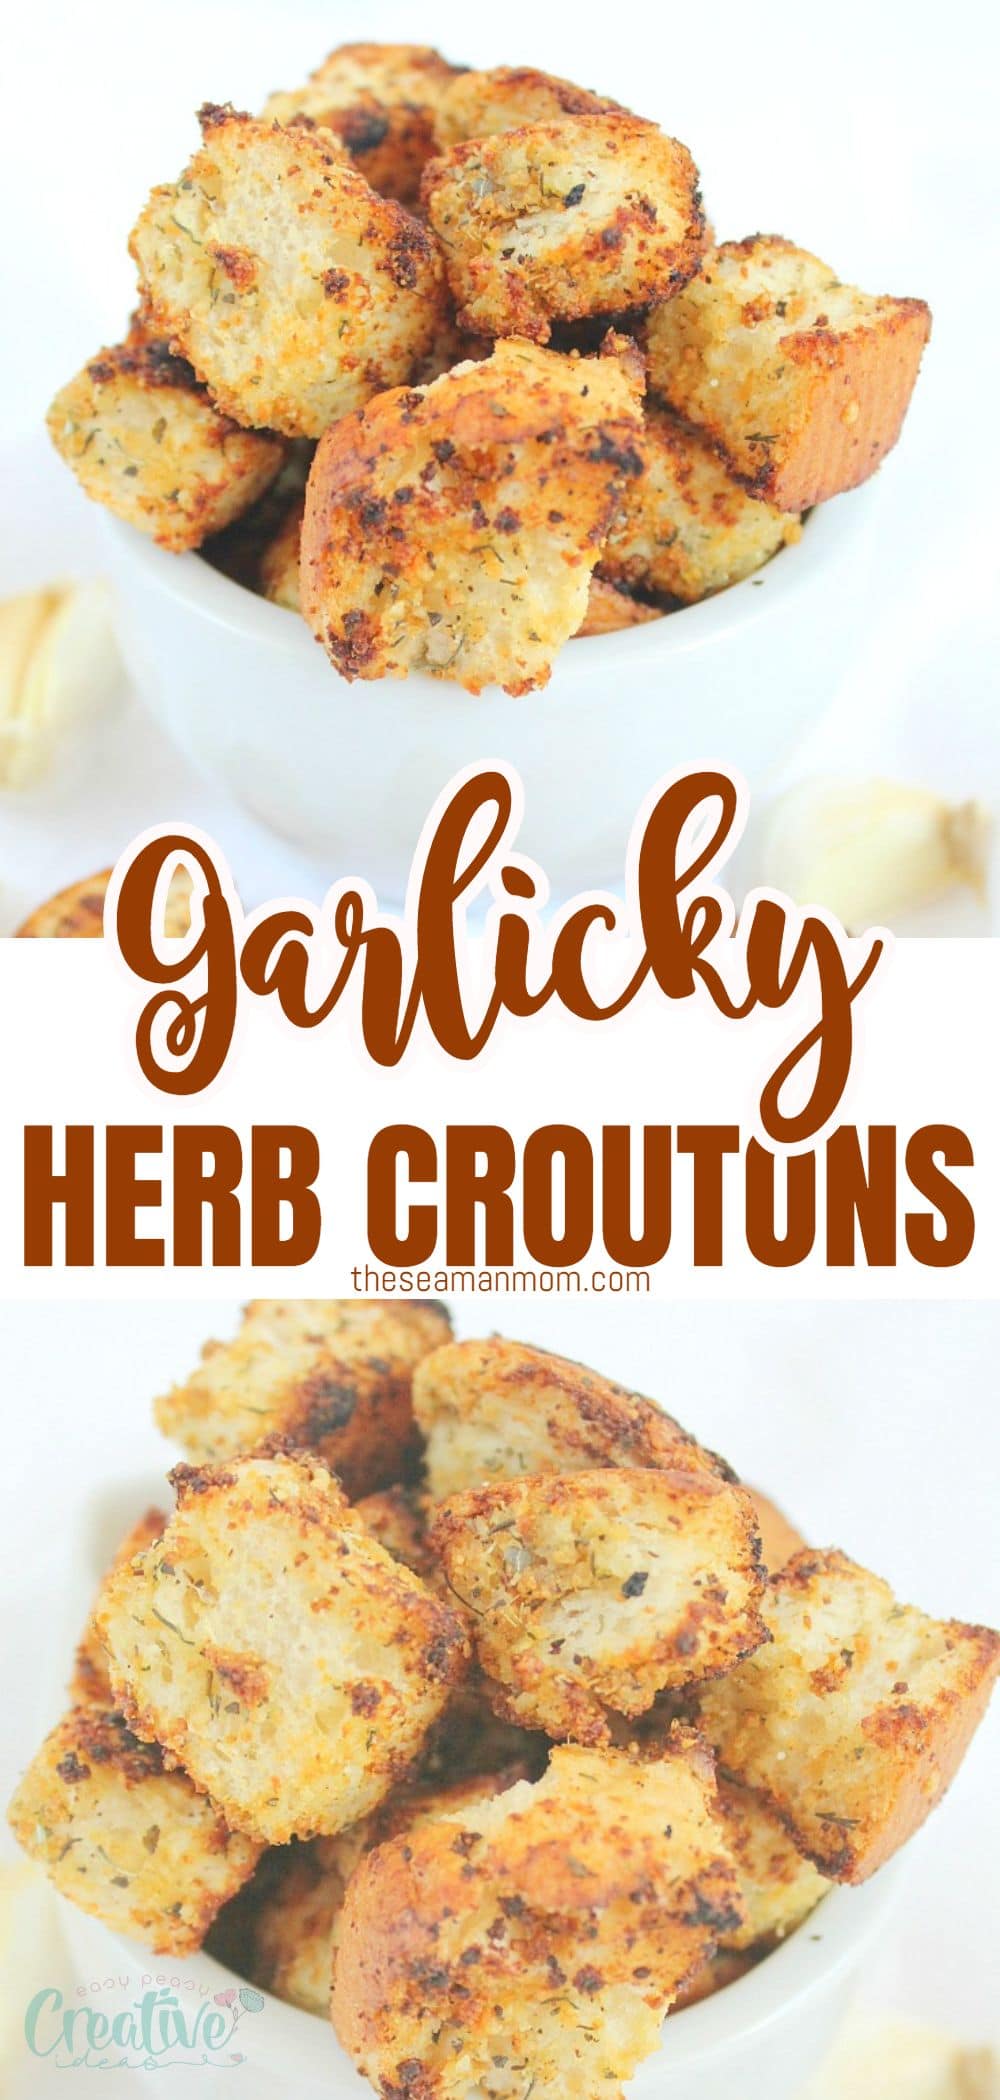 Take homemade croutons to the next level with these garlic herb croutons! Crisp and full of flavors, these are an excellent addition to your salads, soups or as snacks. via @petroneagu